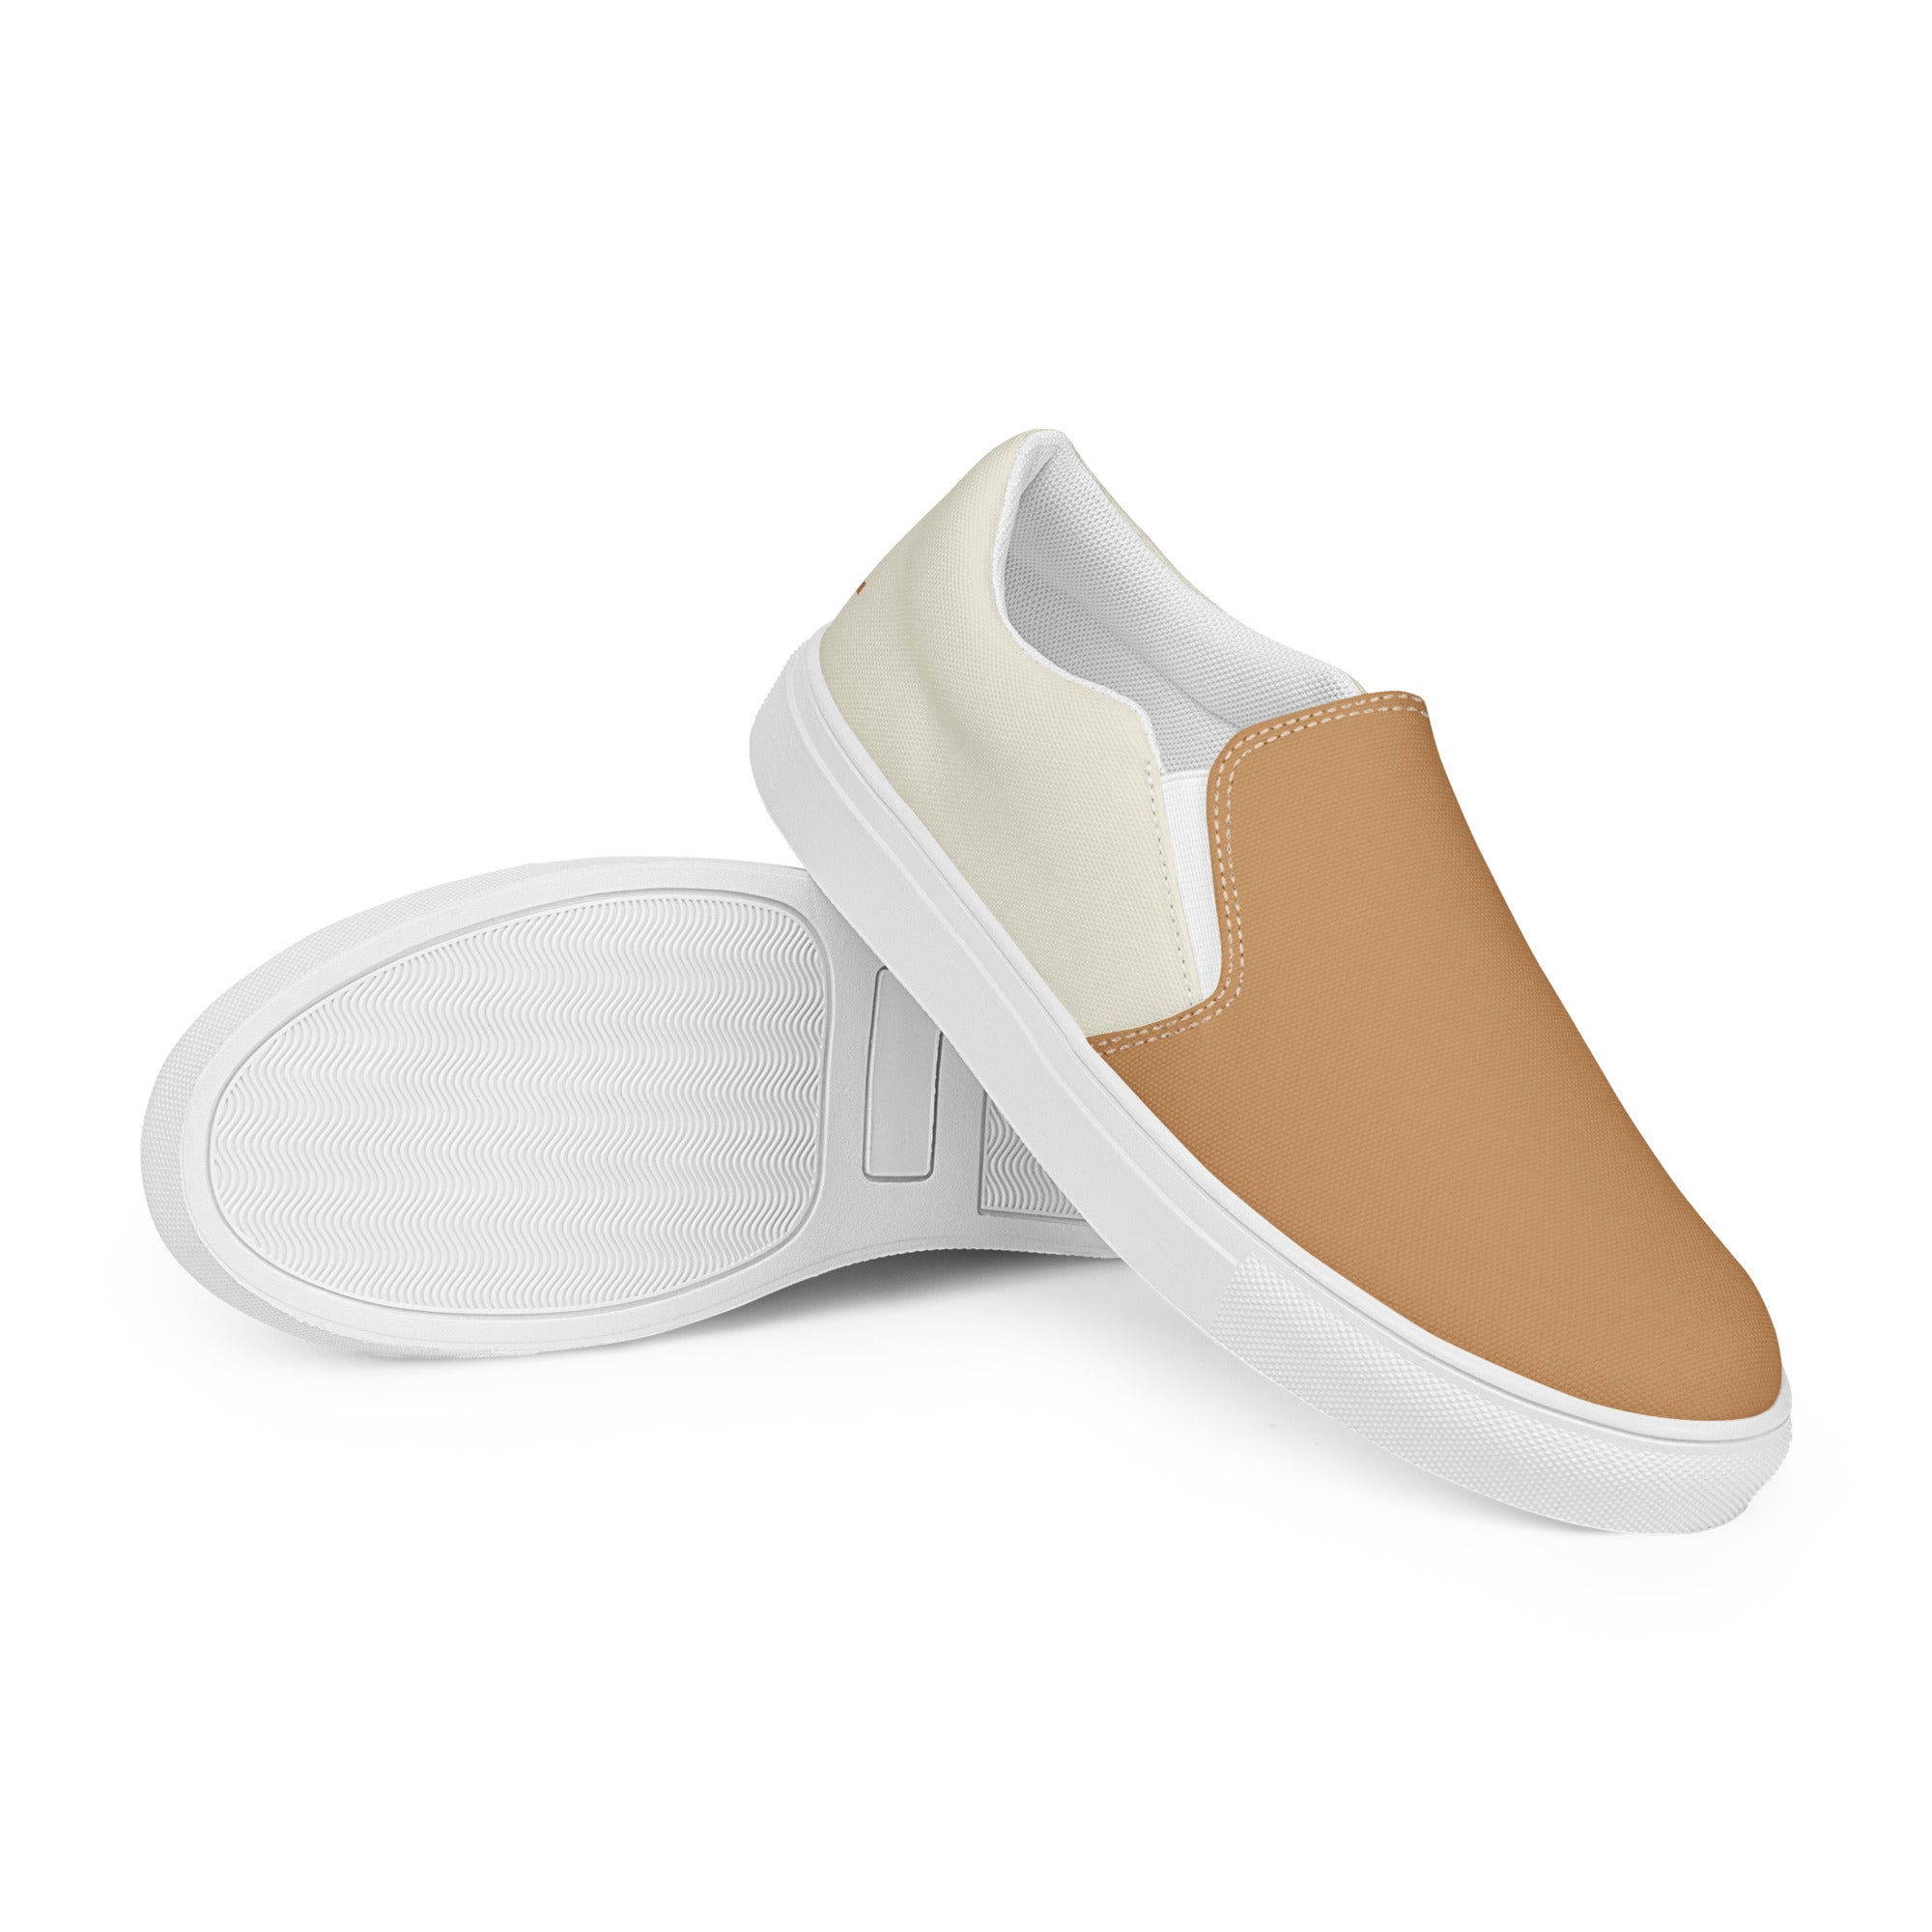 Yahweh Women’s Slip On Canvas Shoes Cream Size: 5 Jesus Passion Apparel